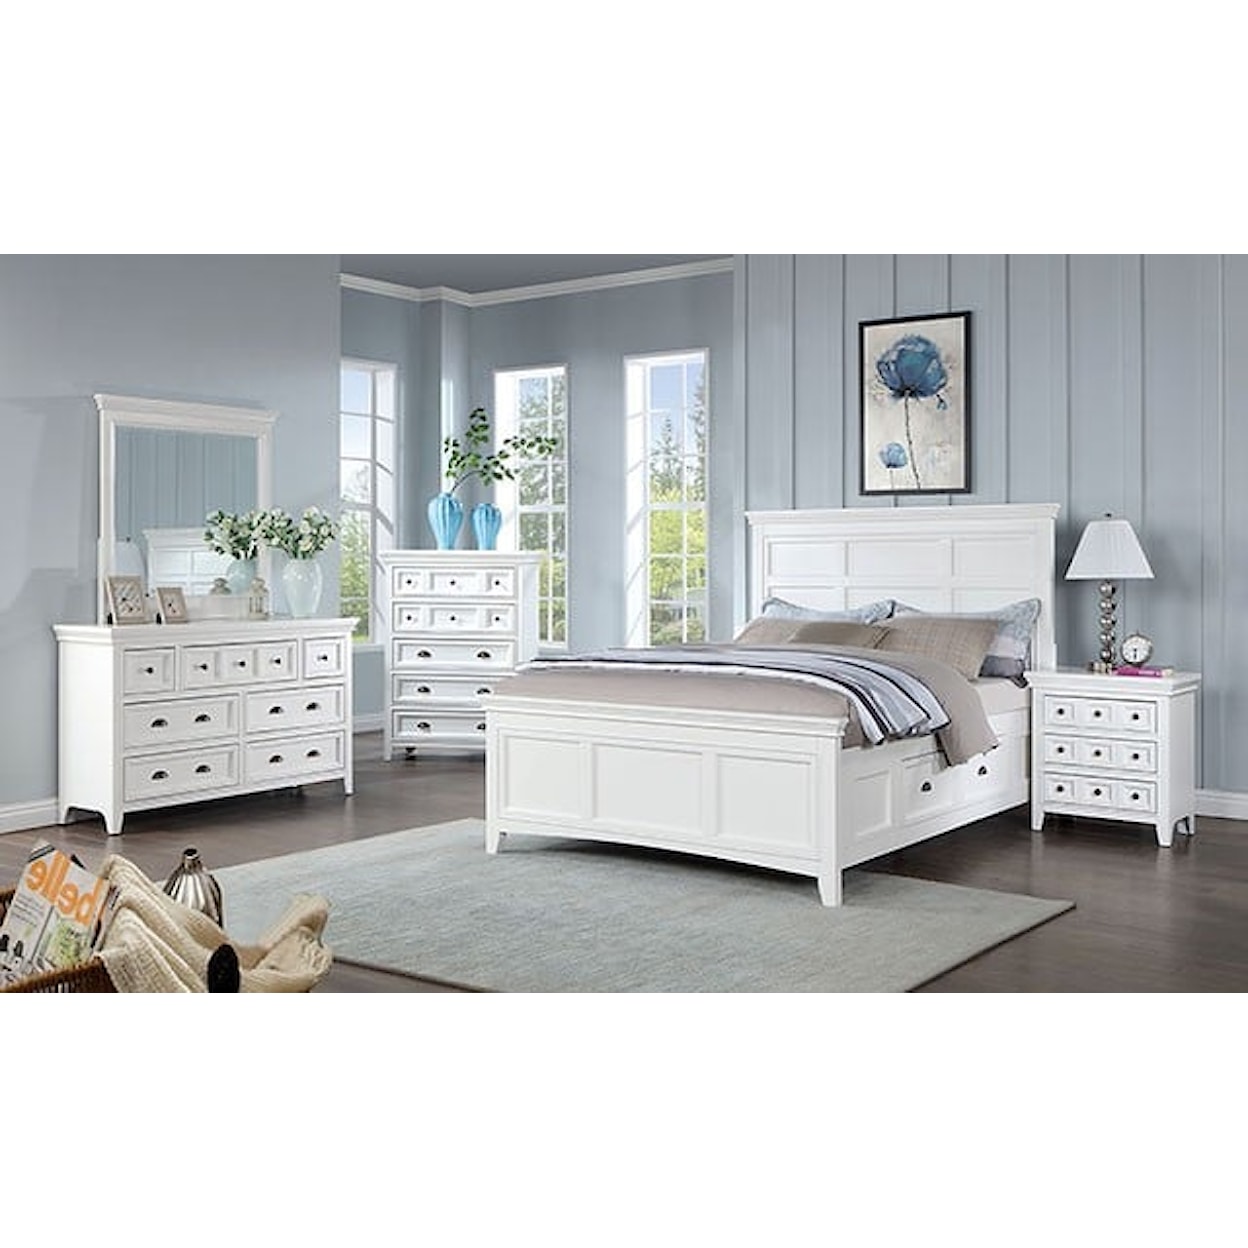 Furniture of America CASTILE 5-Piece Queen Bedroom Set with Chest